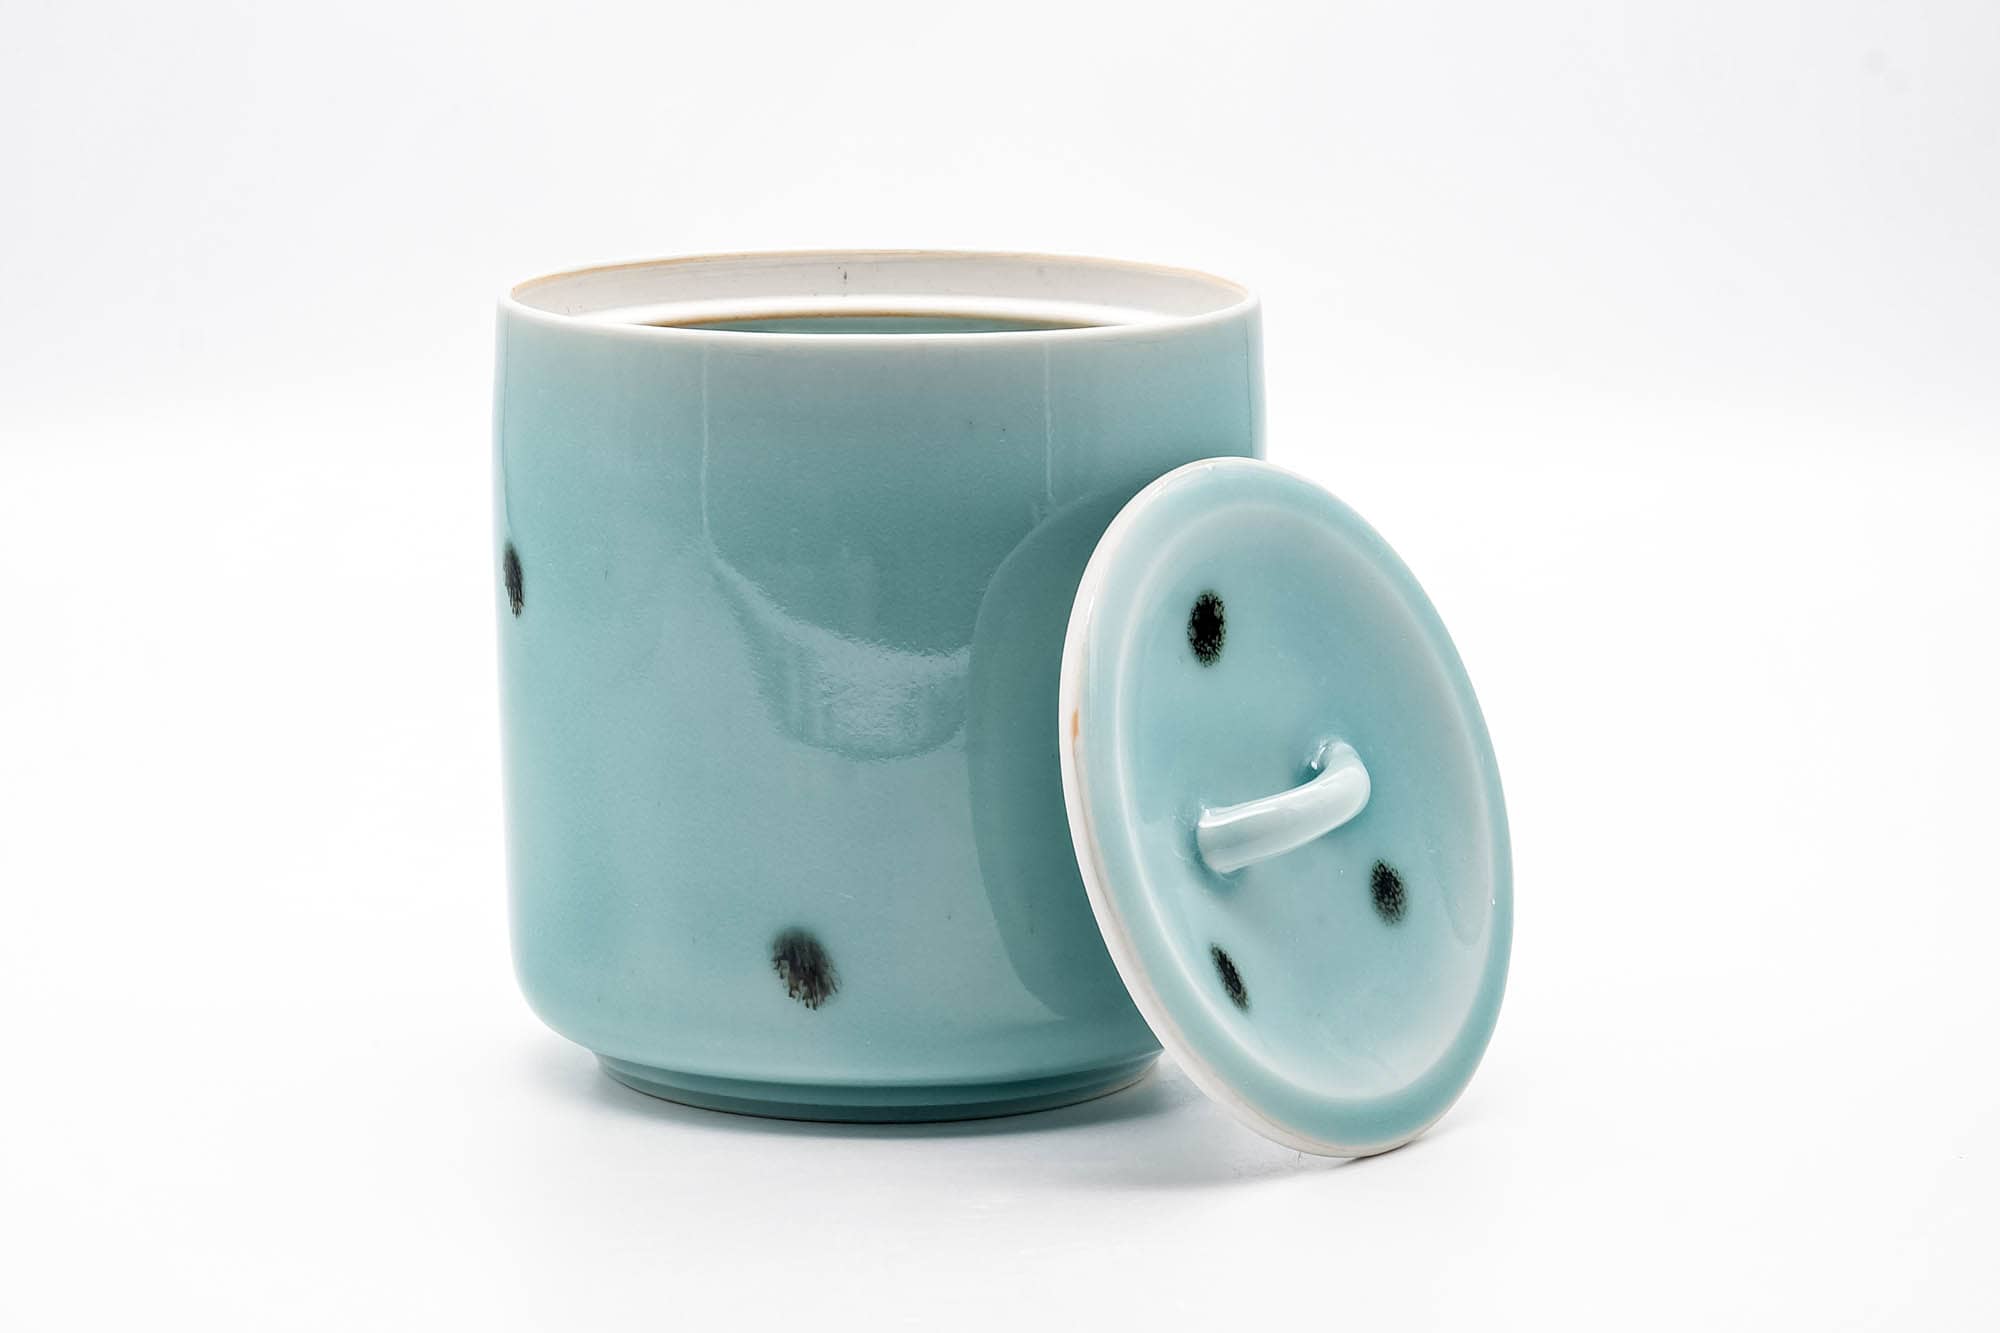 Japanese Mizusashi - Spotted Teal Porcelain Fresh Water Container - 1200ml